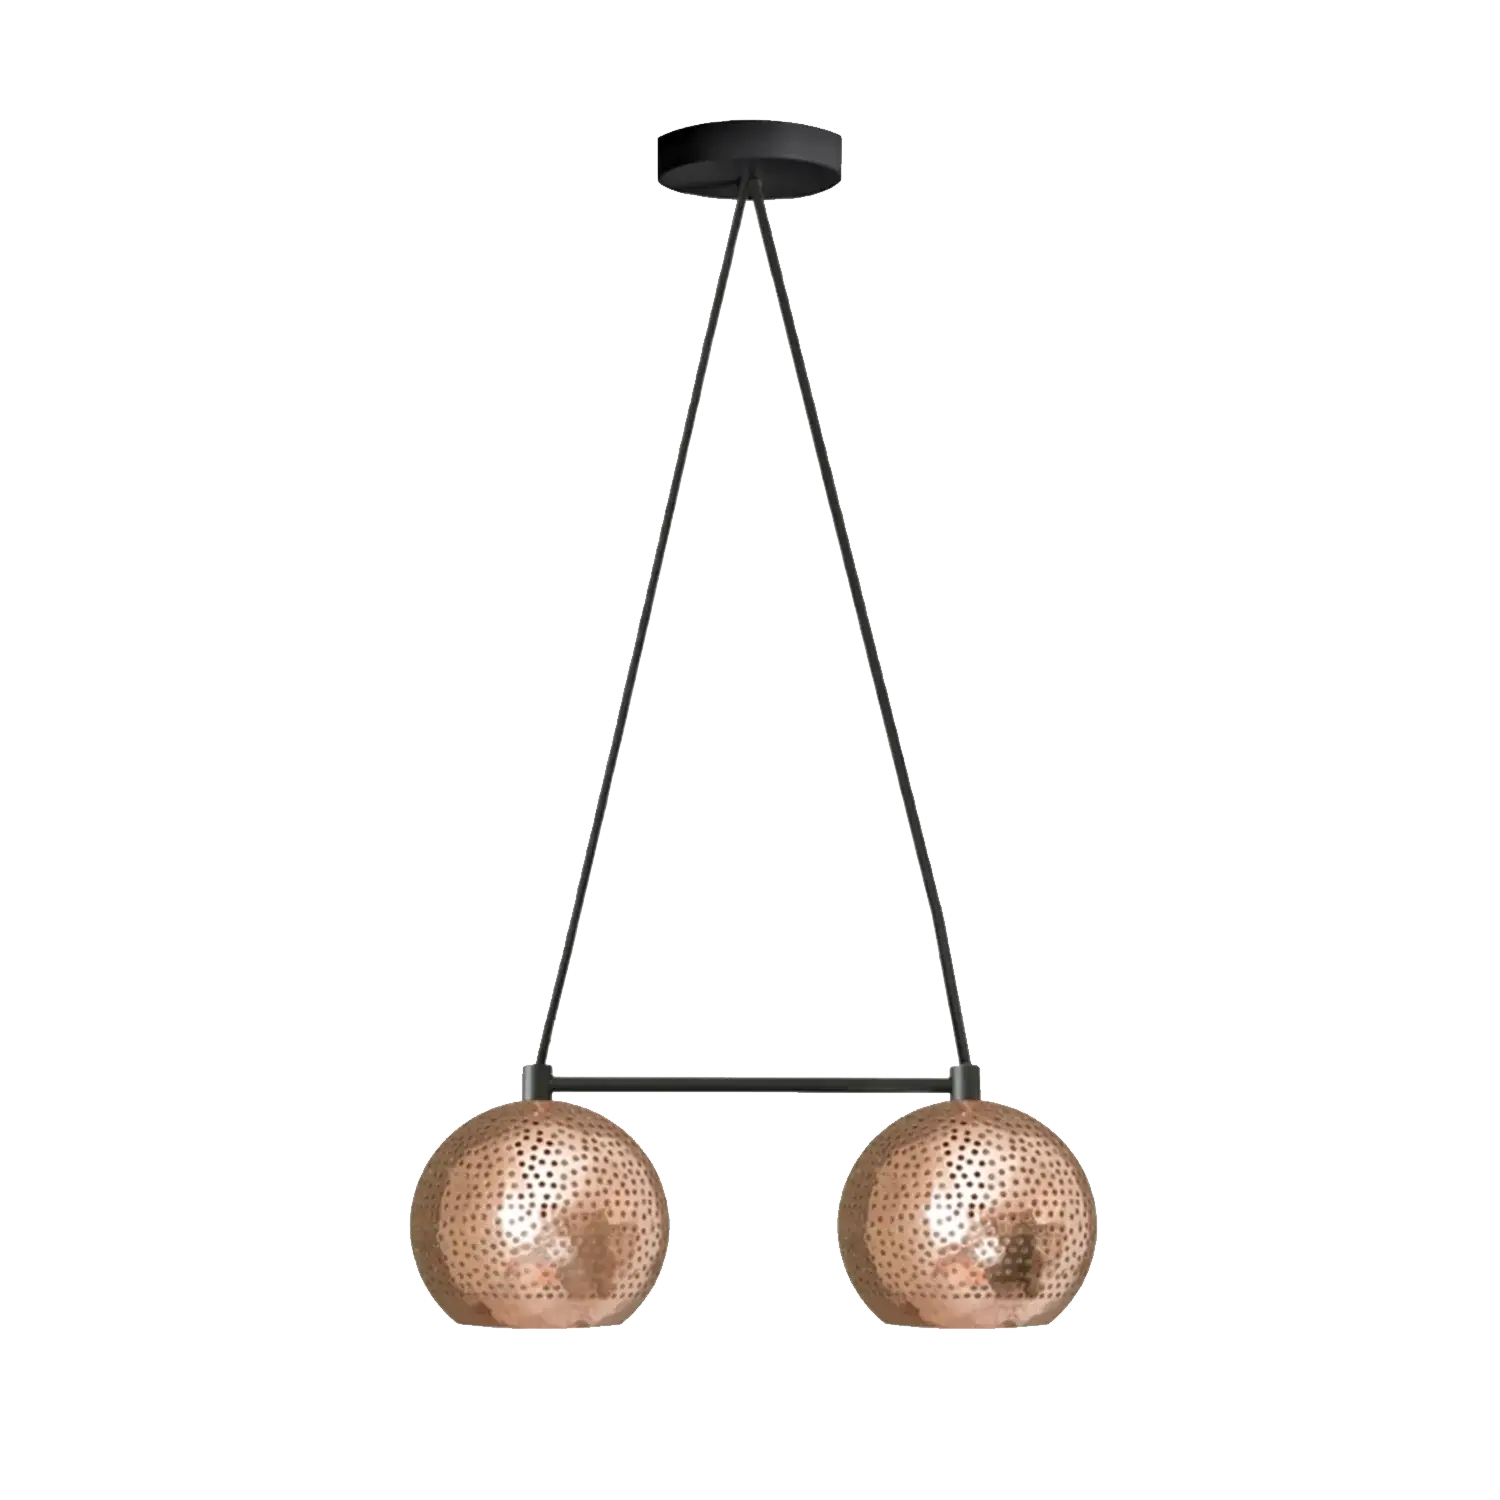 Dounia home Chandelier in Polished copper  made of Metal, Model: Shams